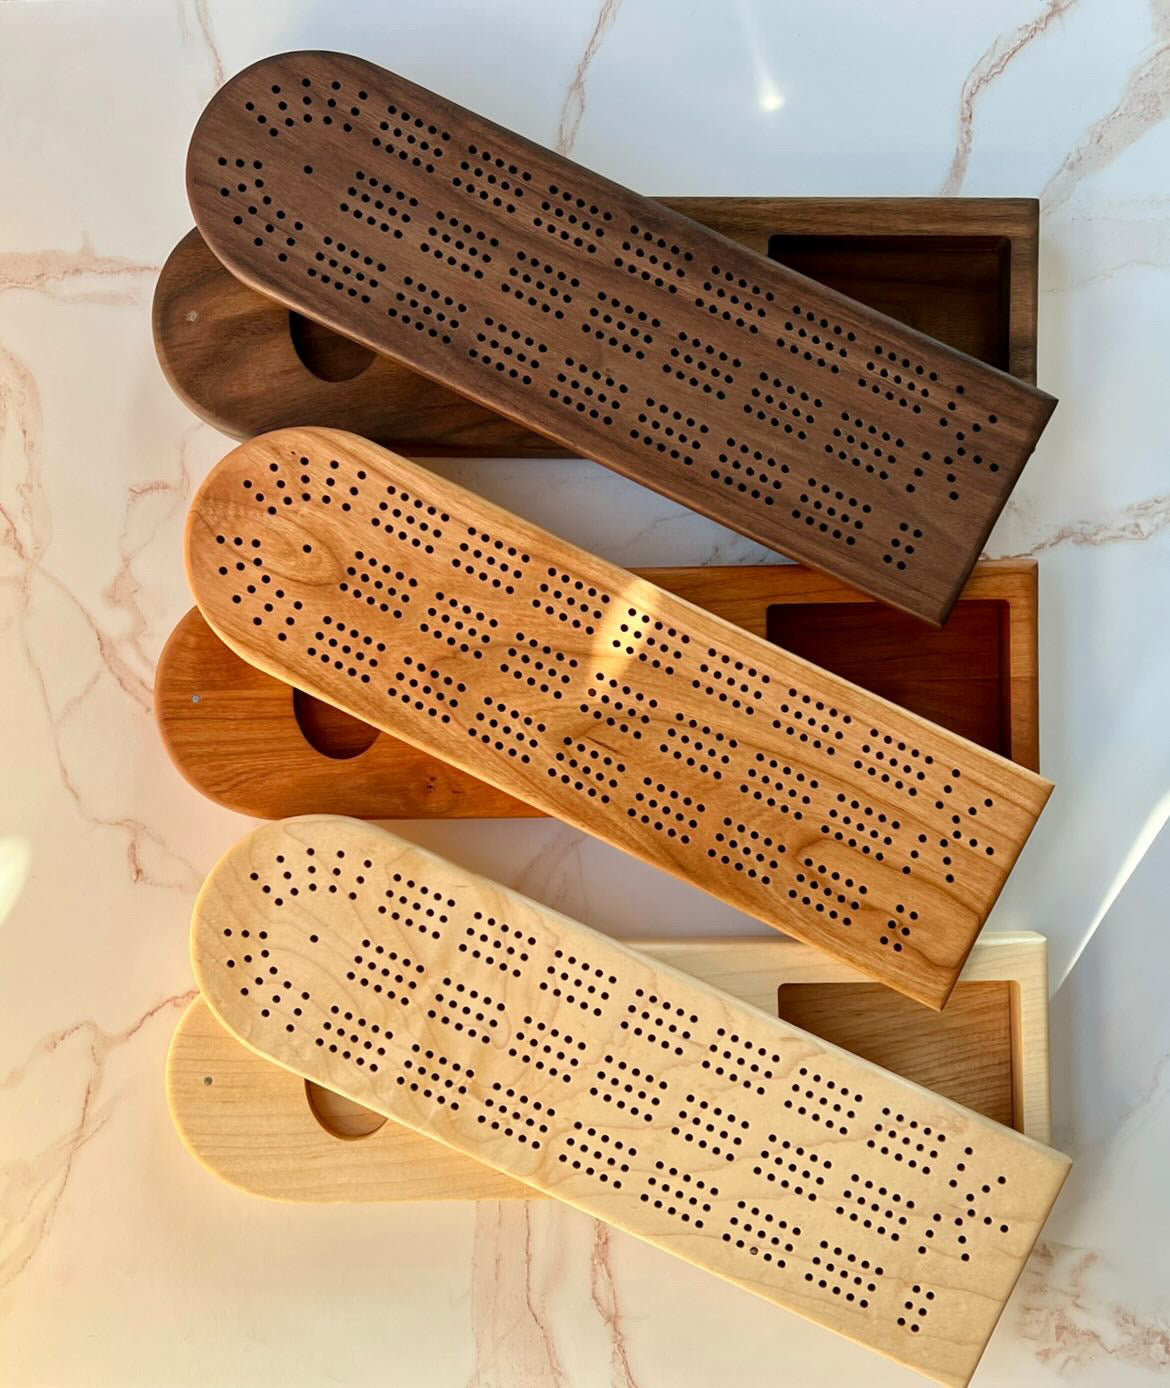 Three handmade wooden cribbage boards with swivel top card and peg storage in 3 different natural wood colors: light, medium and dark, made by Camino Woodshop in Milwaukee, WI makes the perfect Christmas or housewarming gift